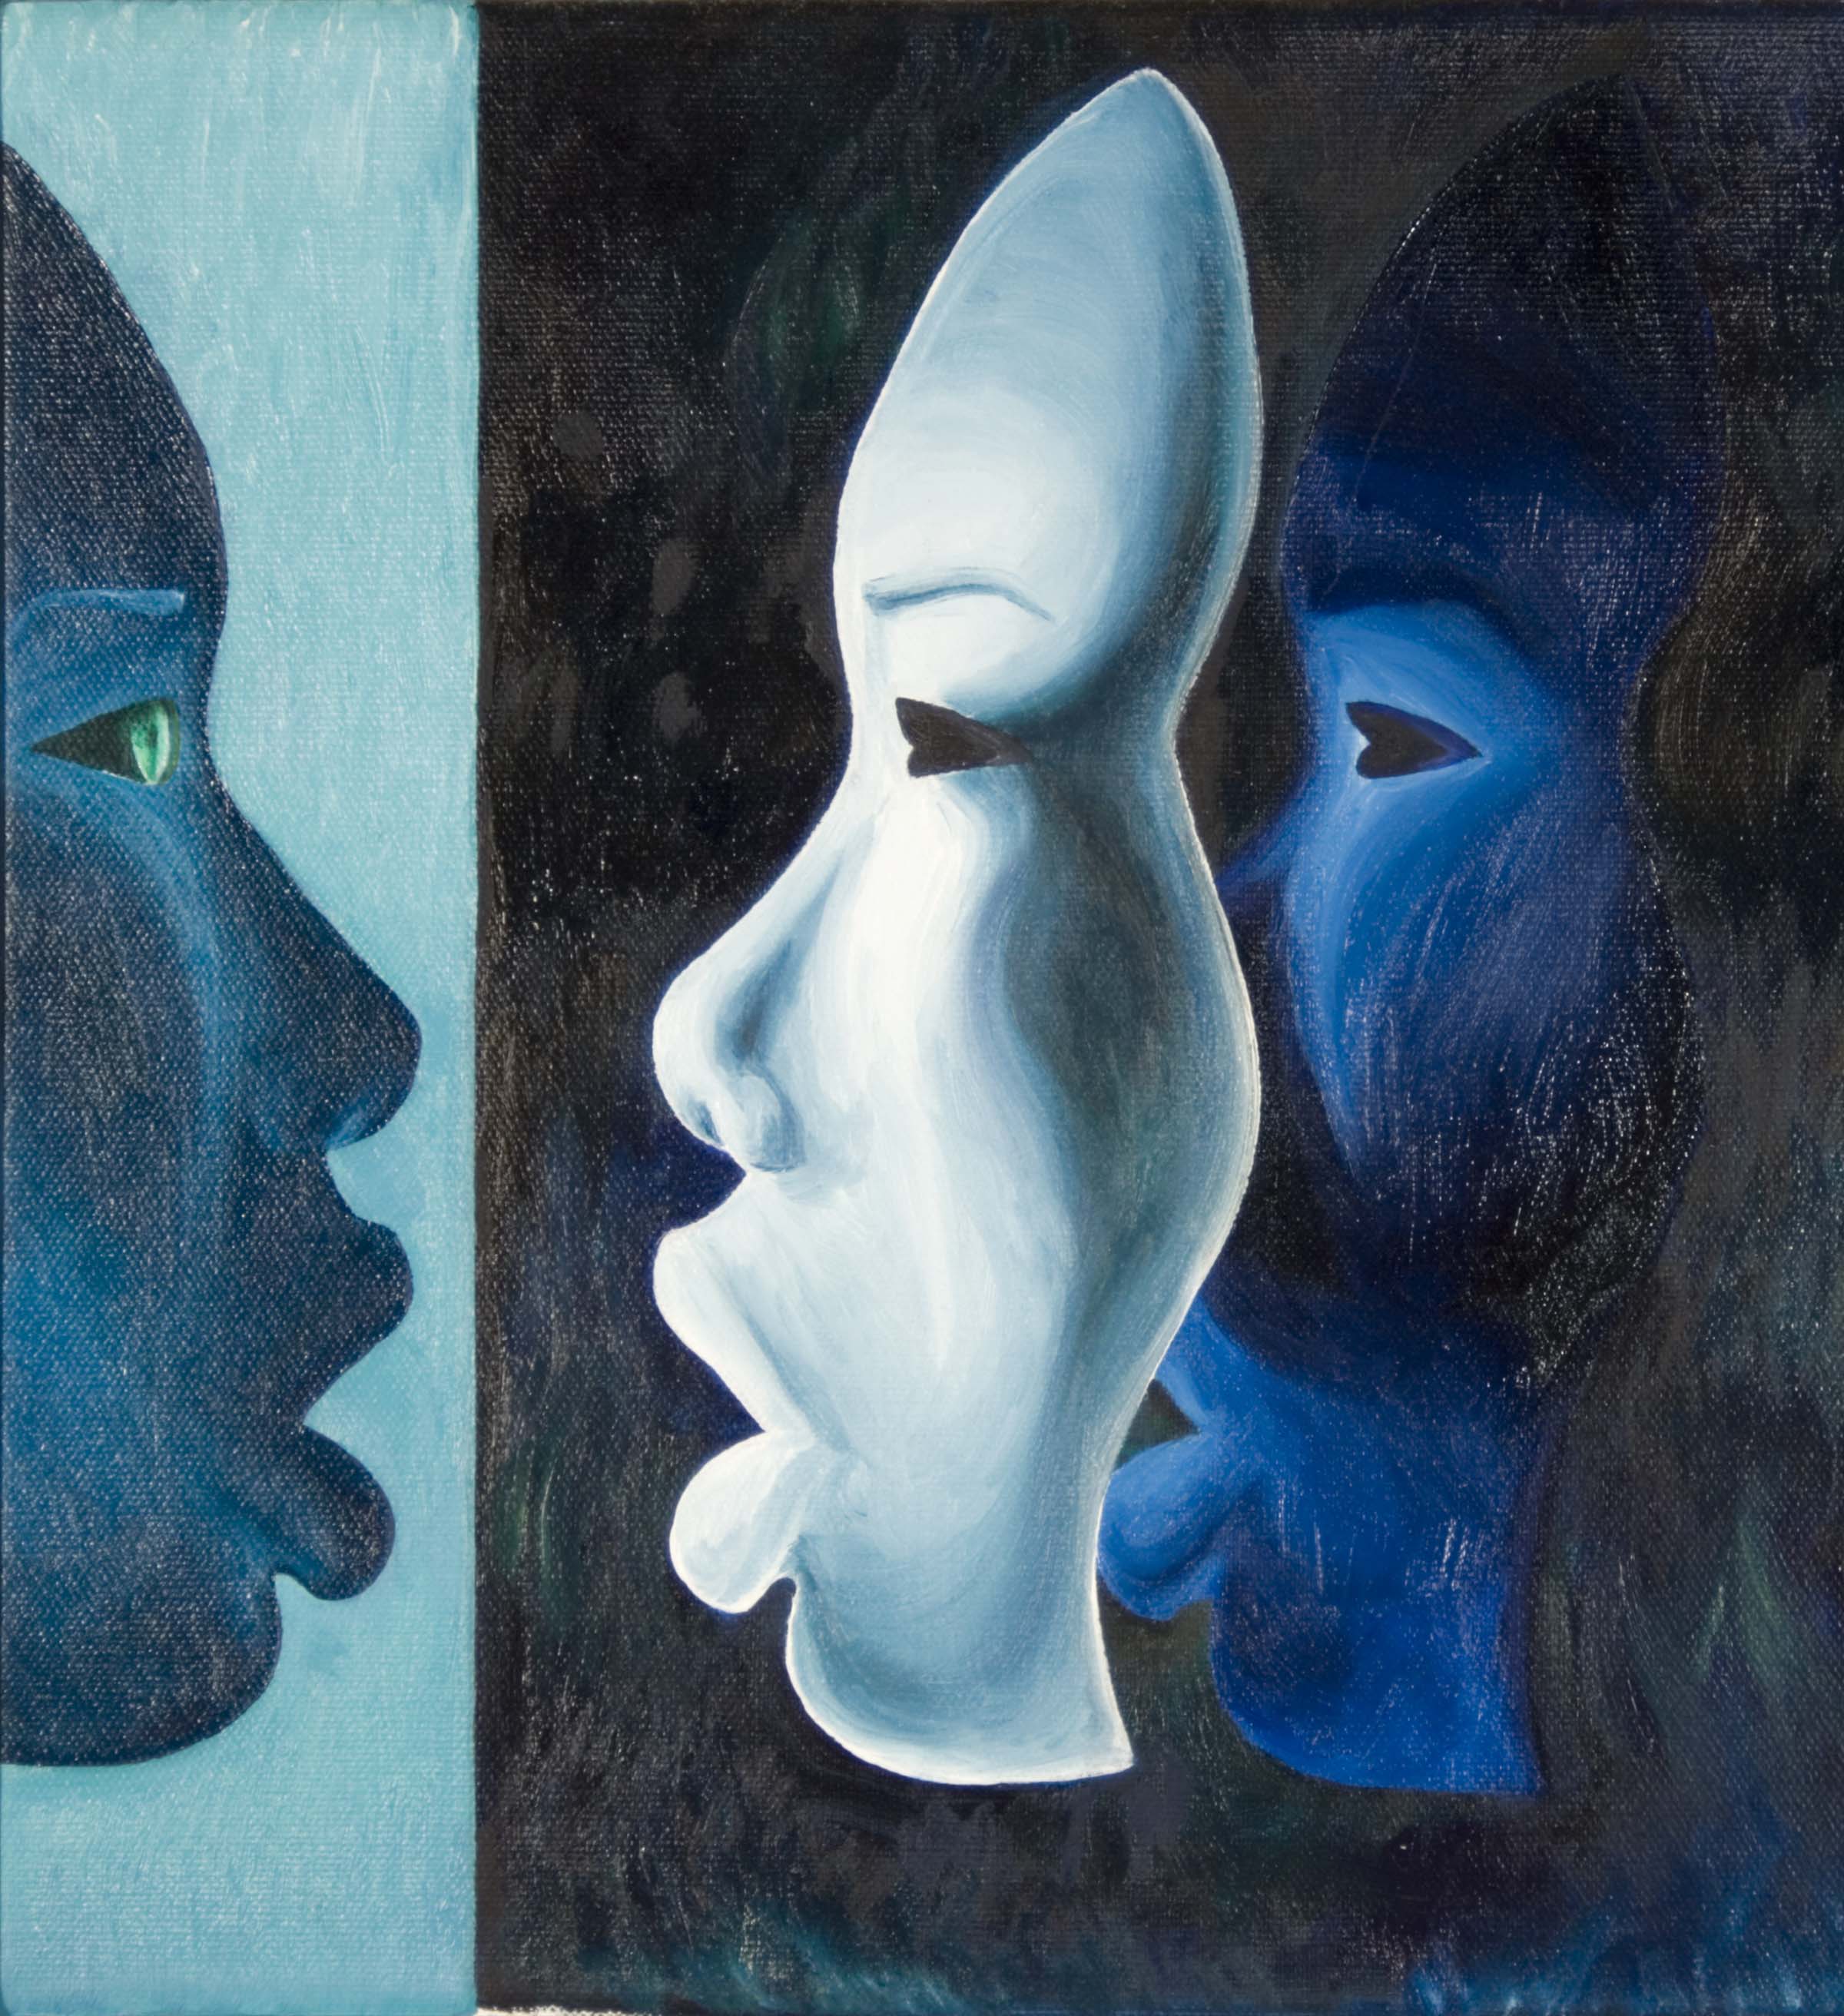 A painting of the silhouette of a face looking at two stacked masks in its likeness. The title and piece are inspired by Aubrie's diagnosis of infantile-onset facioscapulohumeral muscular dystrophy.